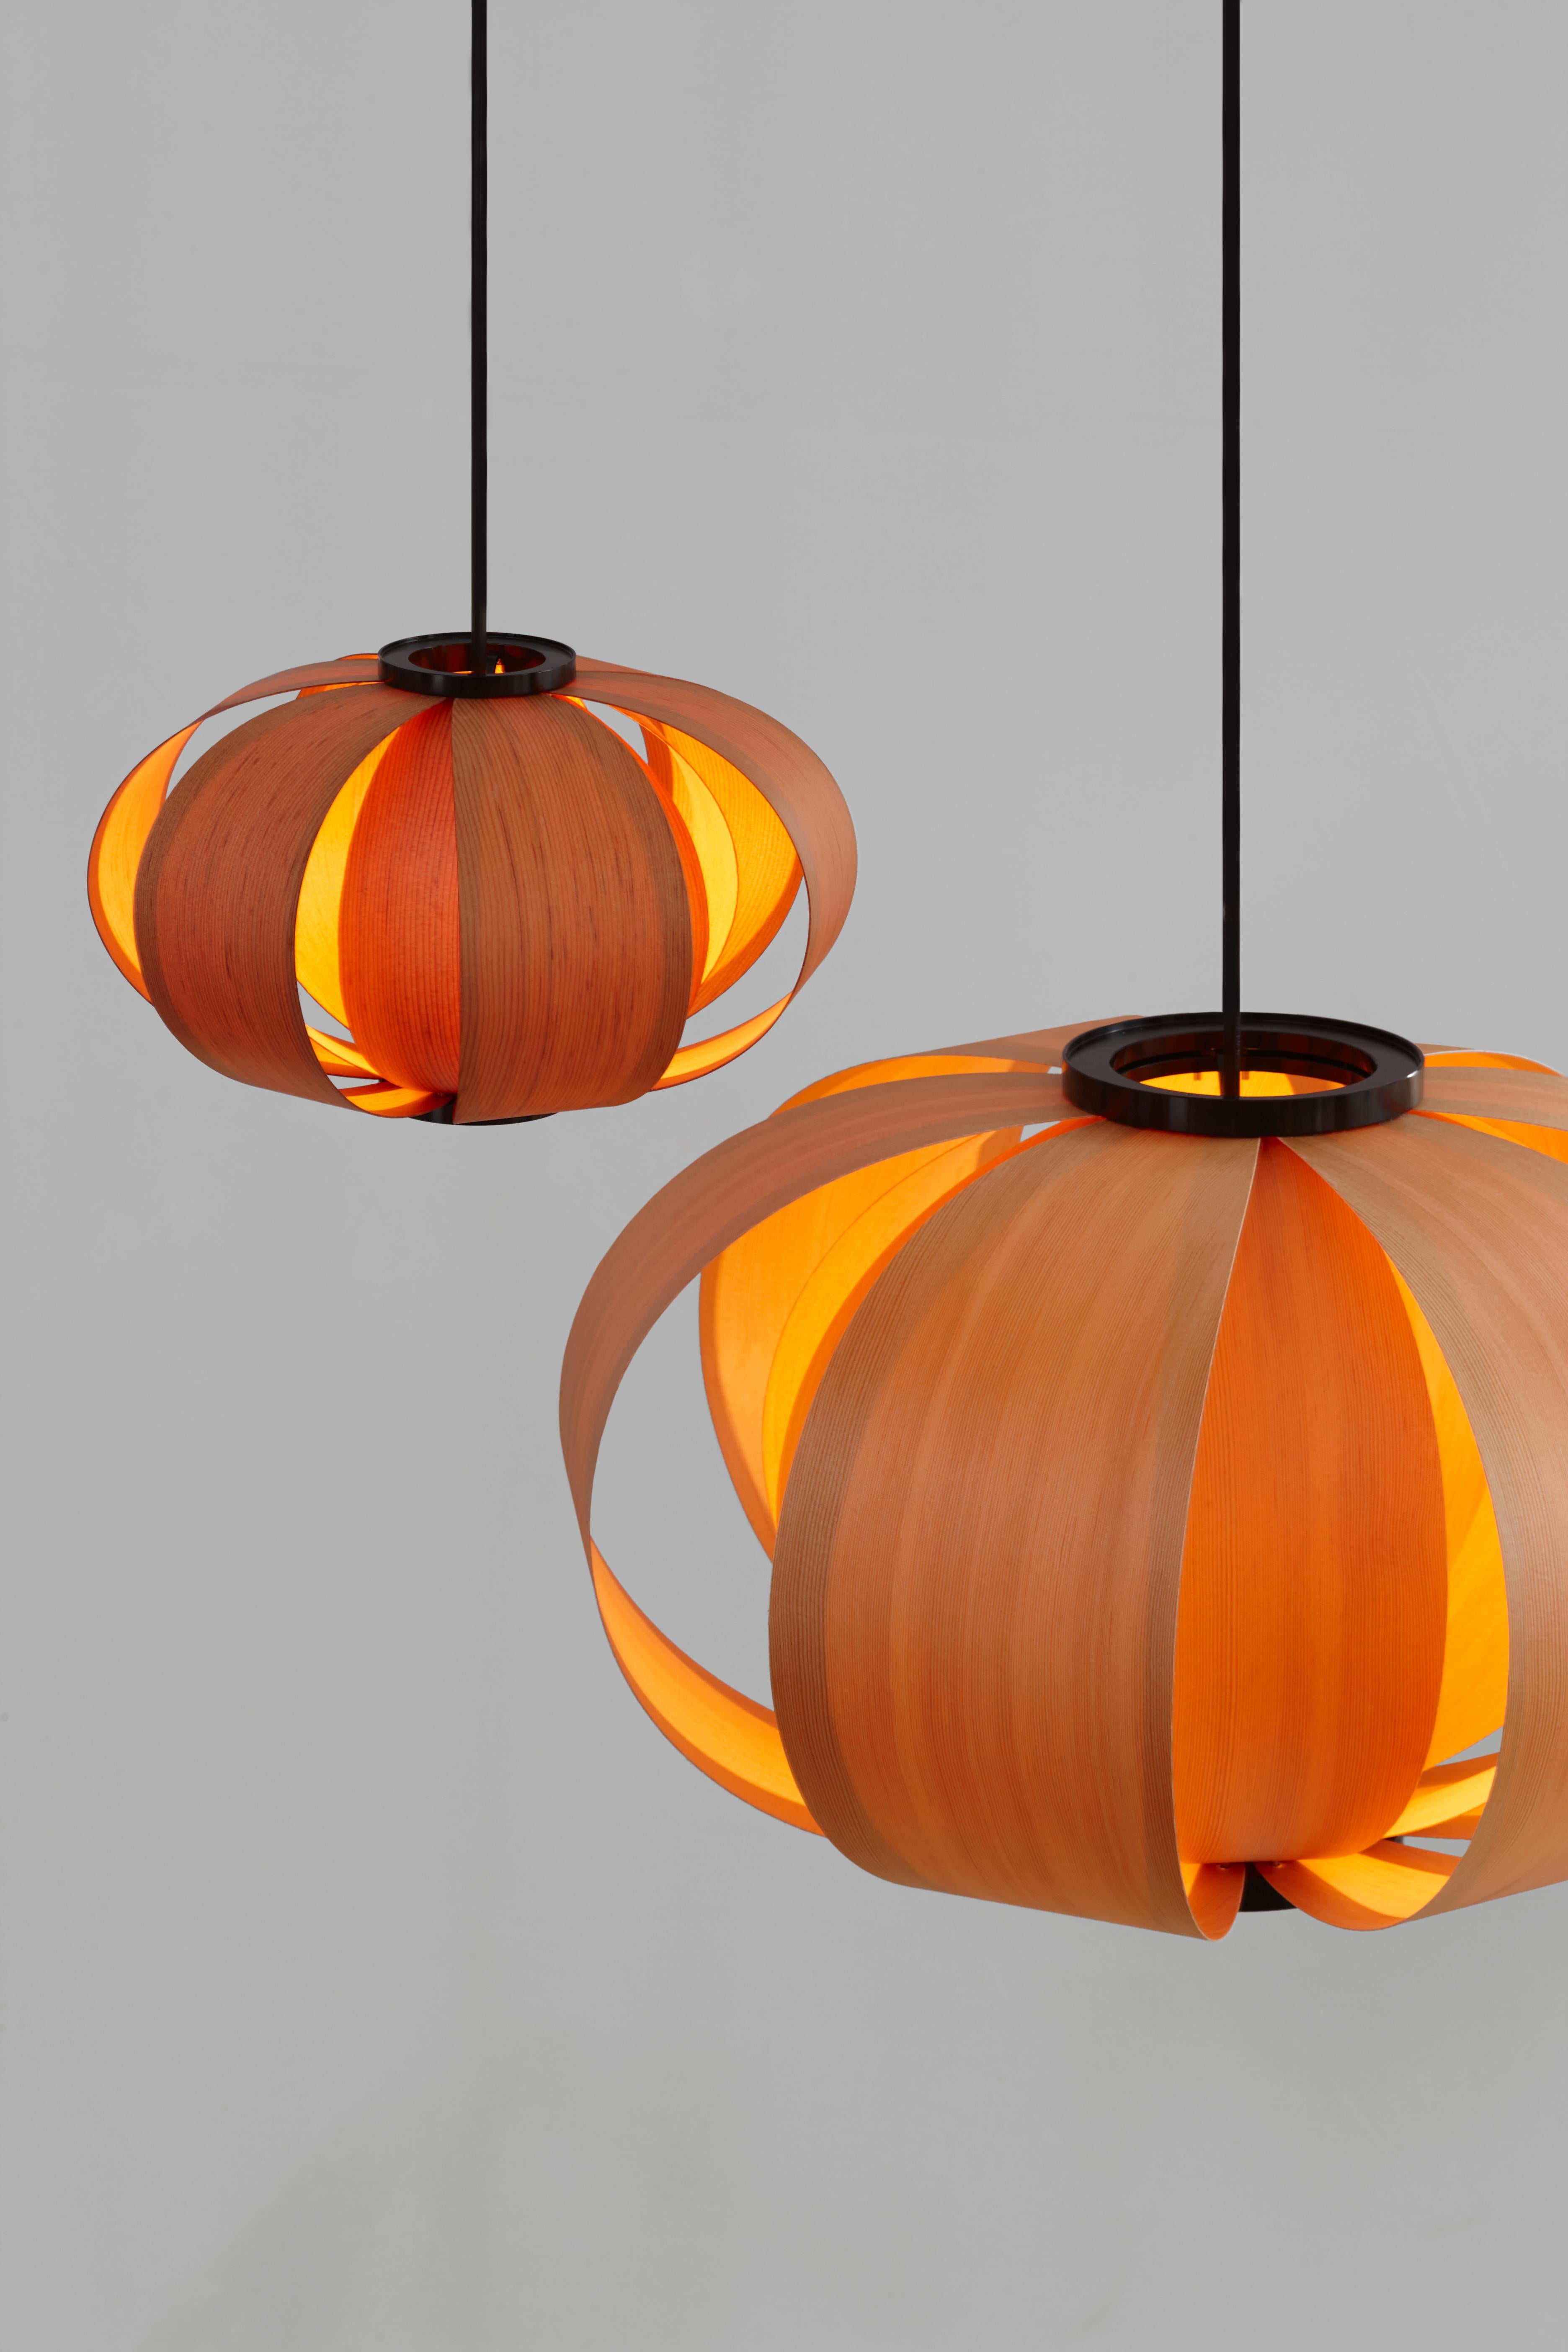 Bentwood J. A. Coderch 'Disa Mini' Wood Suspension Lamp for Tunds For Sale